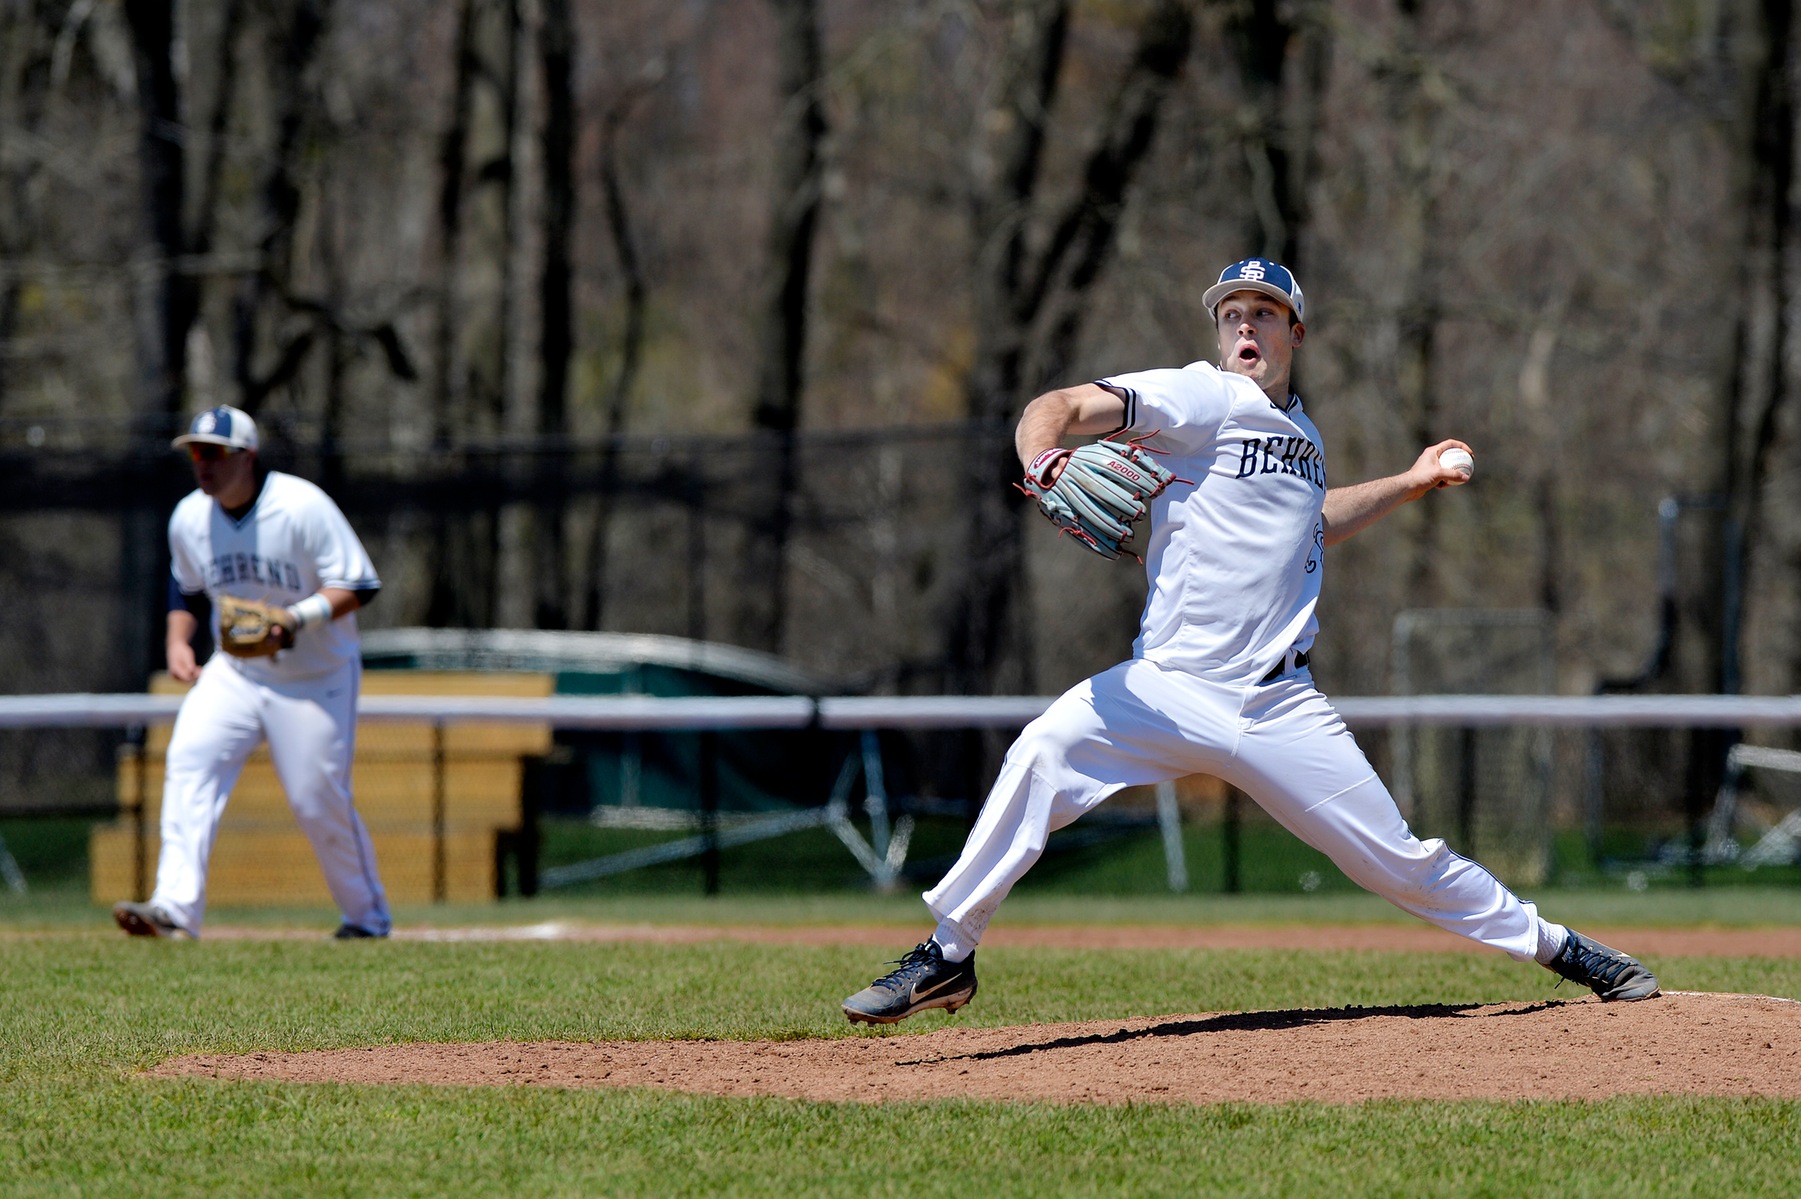 Herzing Selected AMCC Pitcher of the Week